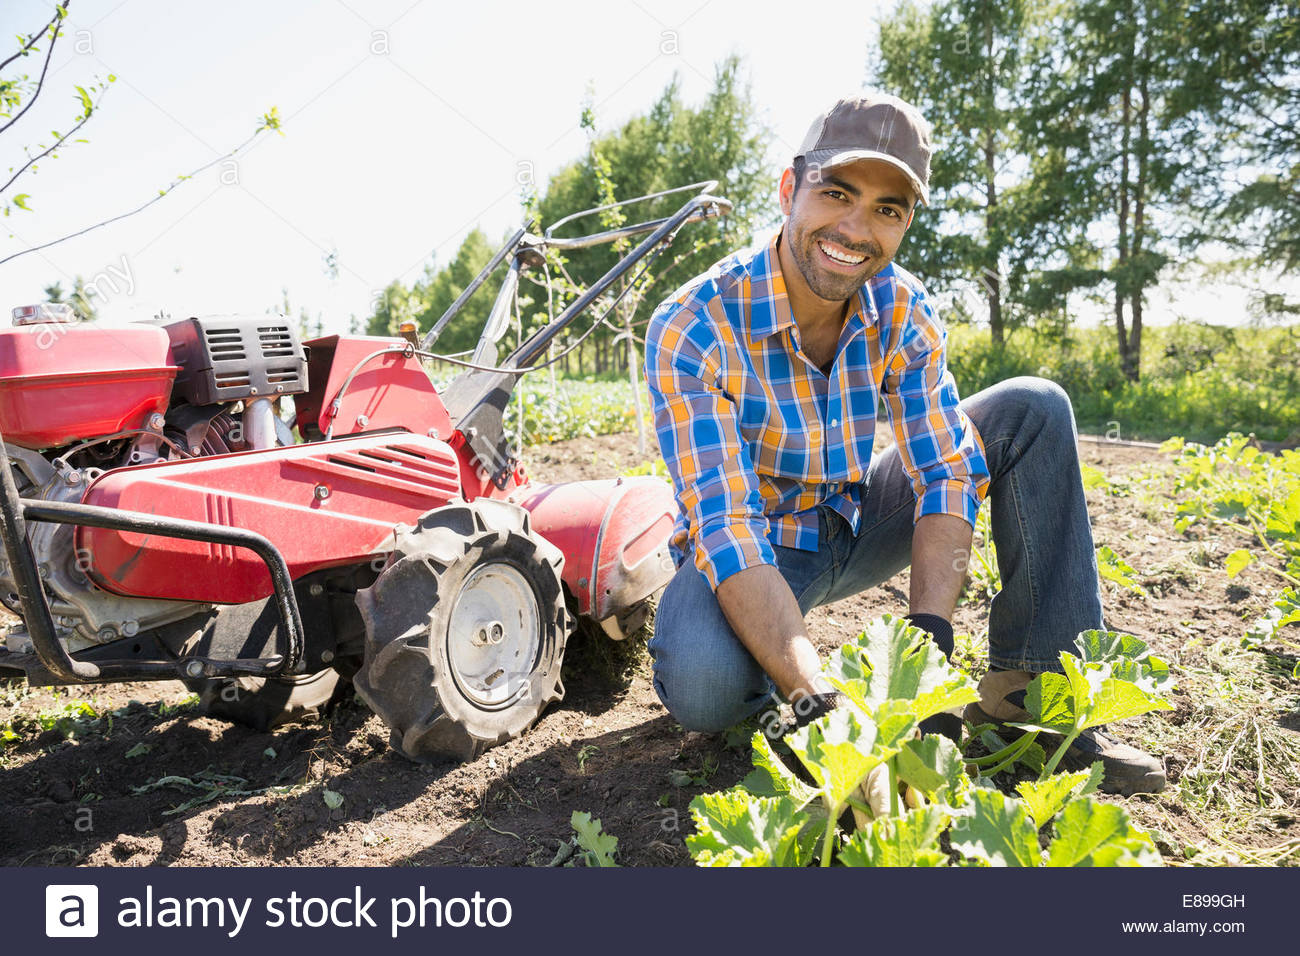 Smiling man with rototiller in community garden Stock Photo